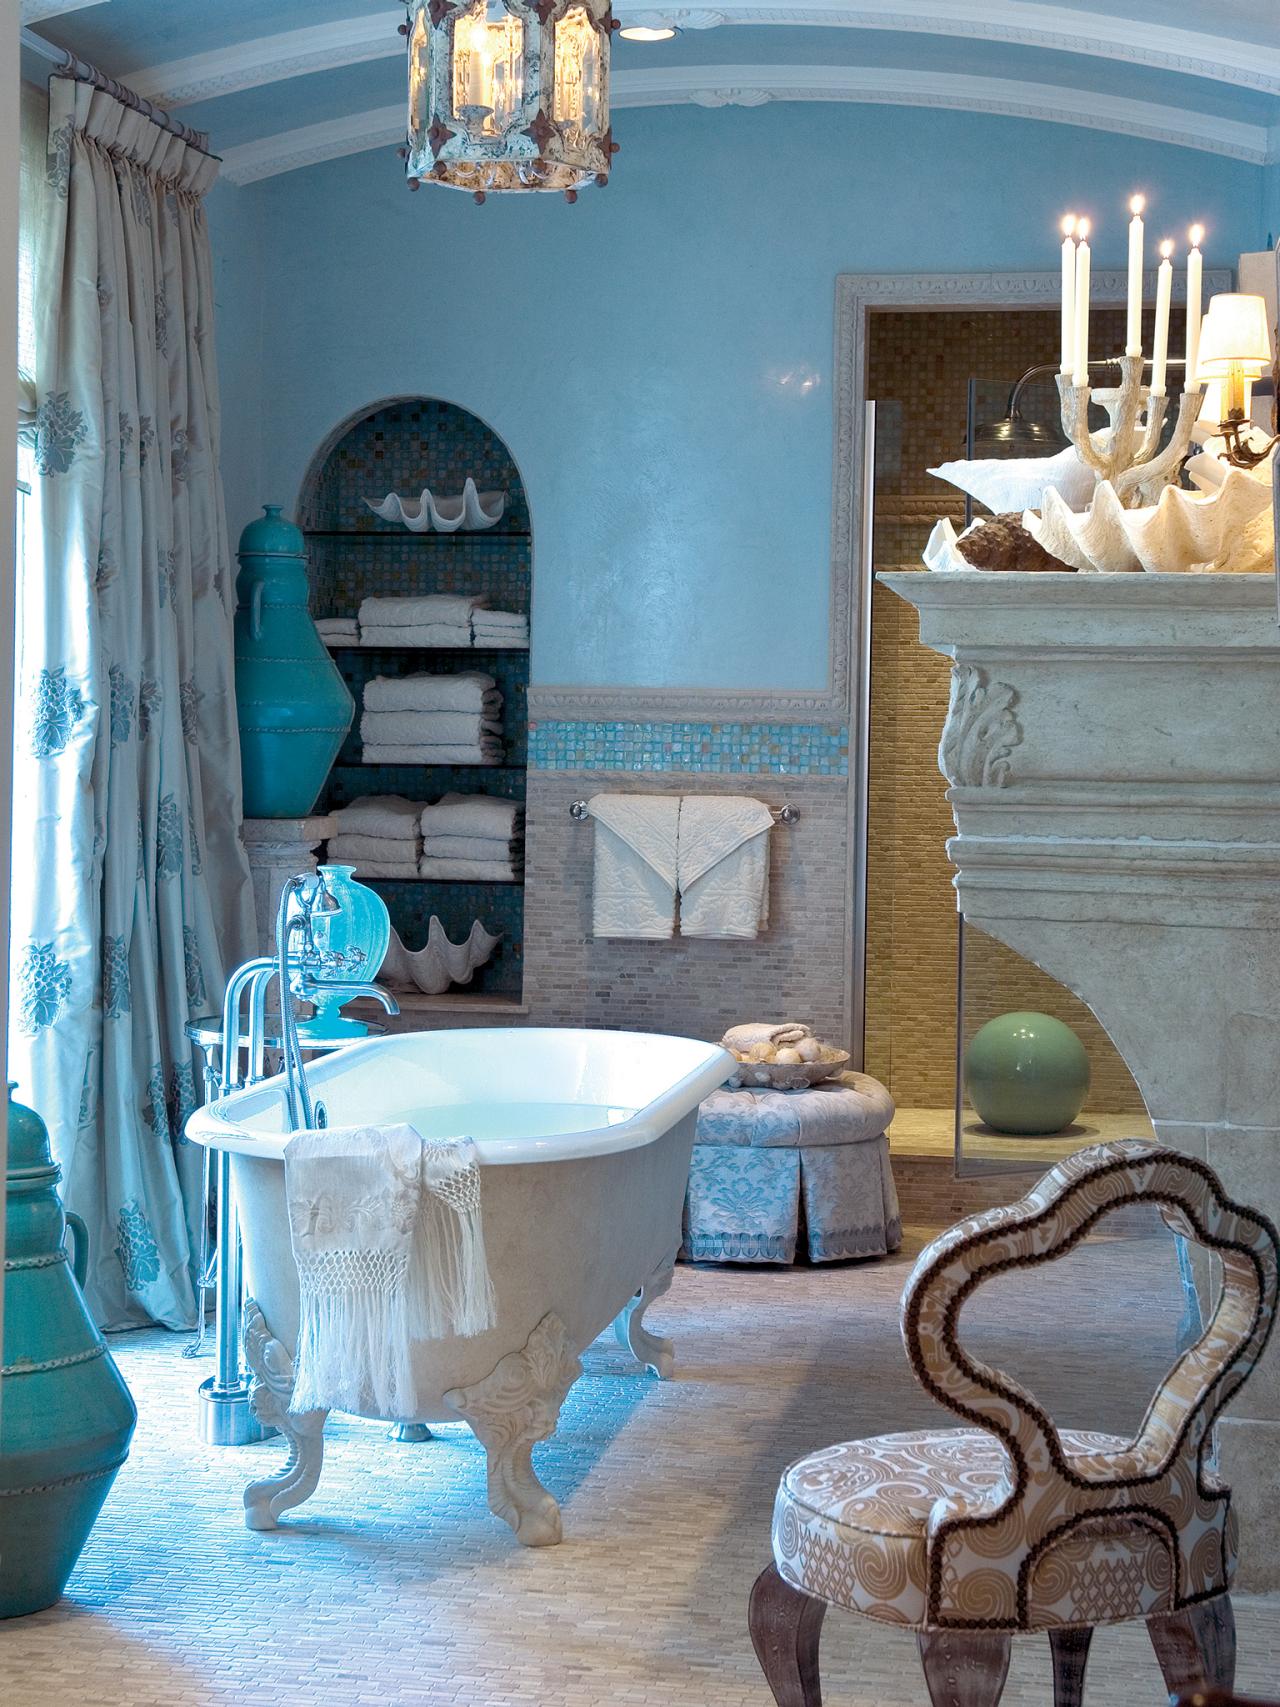 Bathroom Decorating Tips Ideas Pictures From HGTV HGTV